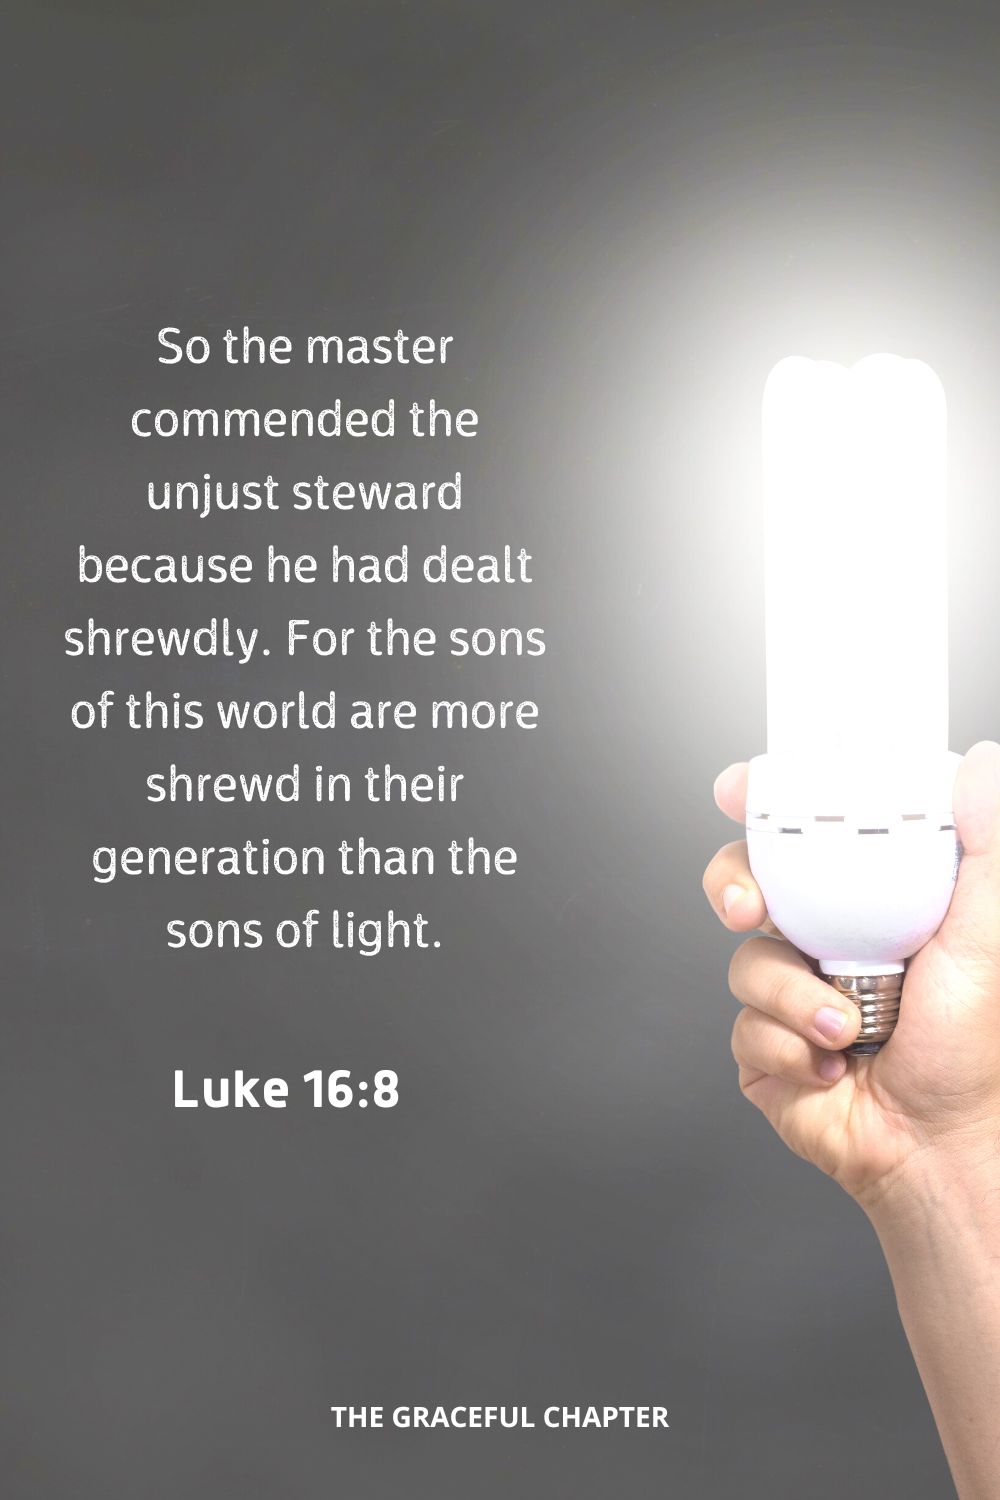 So the master commended the unjust steward because he had dealt shrewdly. For the sons of this world are more shrewd in their generation than the sons of light.